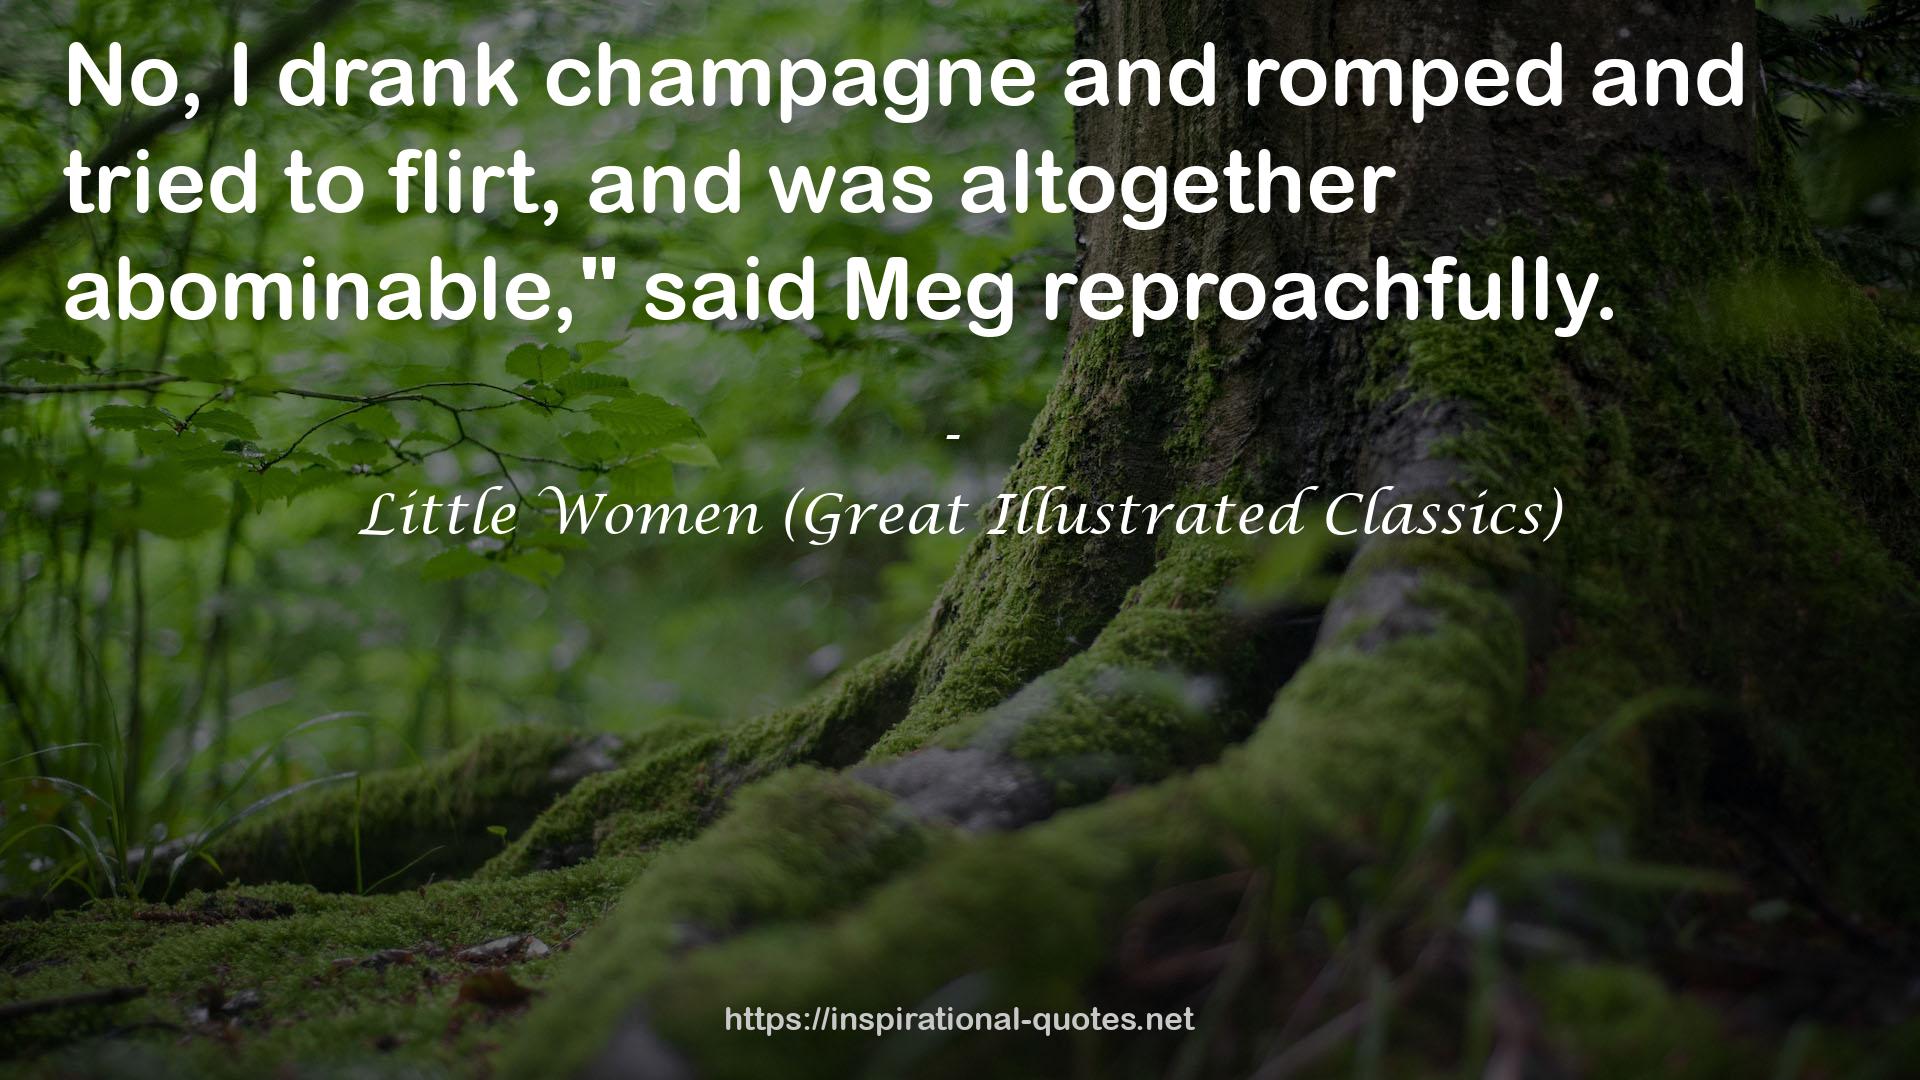 Little Women (Great Illustrated Classics) QUOTES